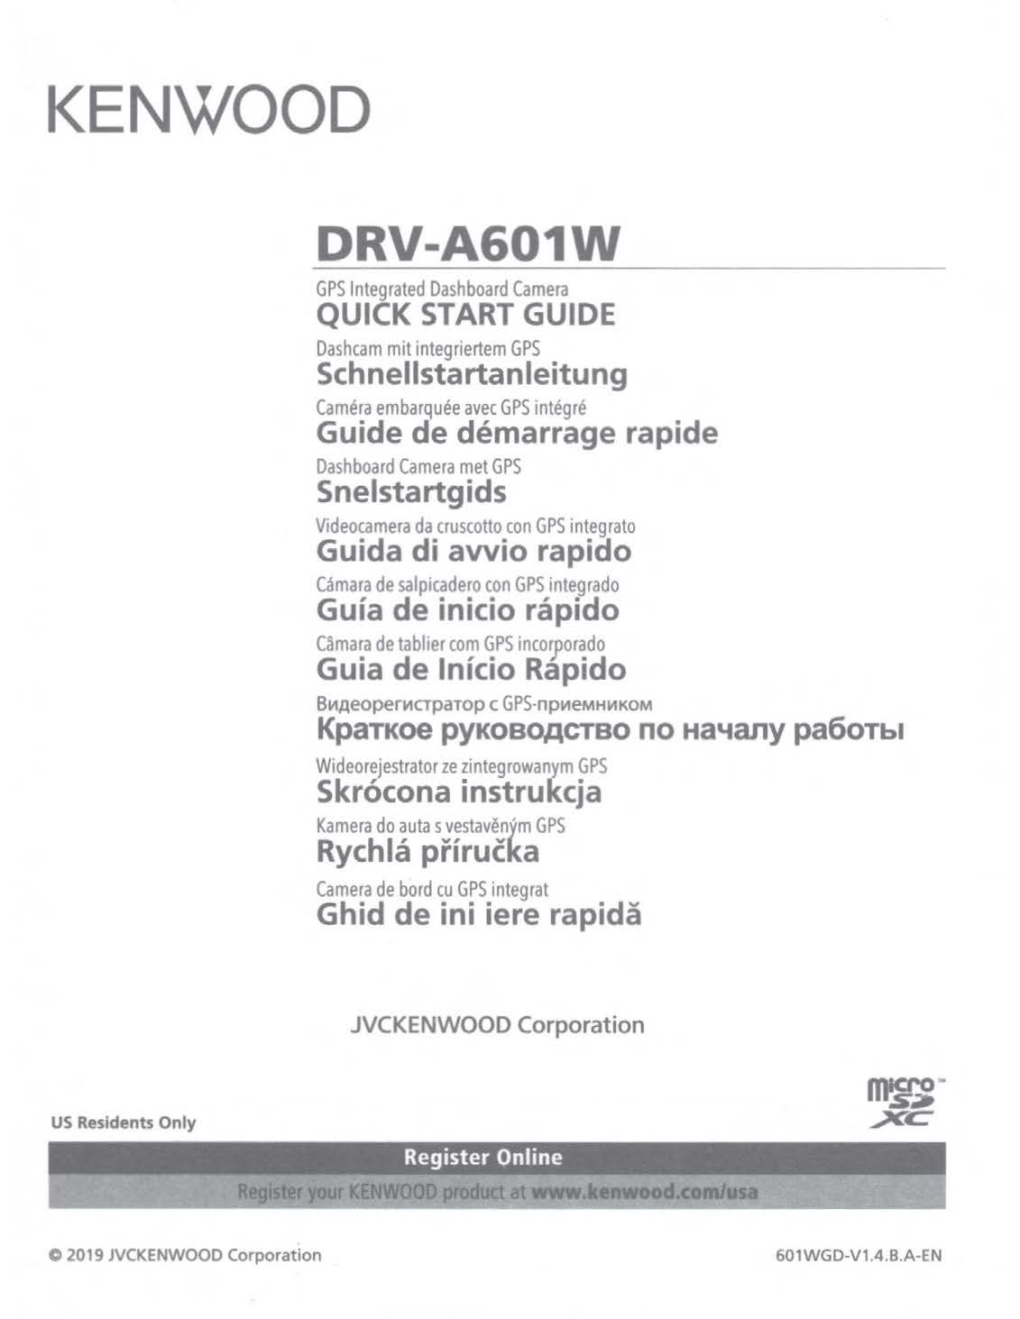 Kenwood DRV-A601WDP Owner's Manual